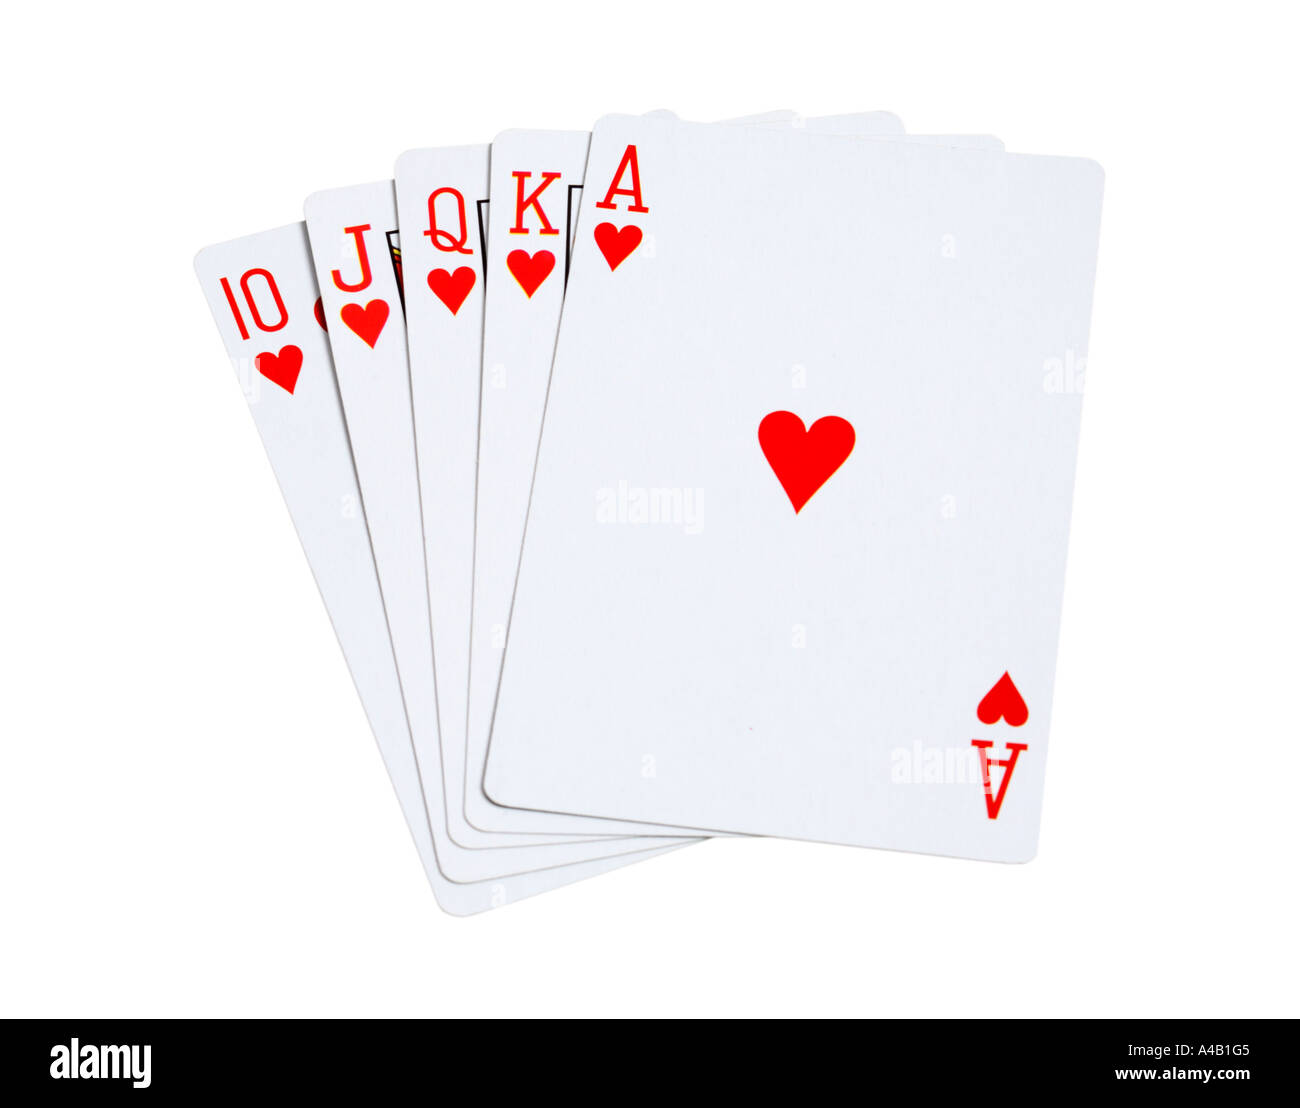 10 Jack Queen King and Ace of Hearts Cards Stock Photo